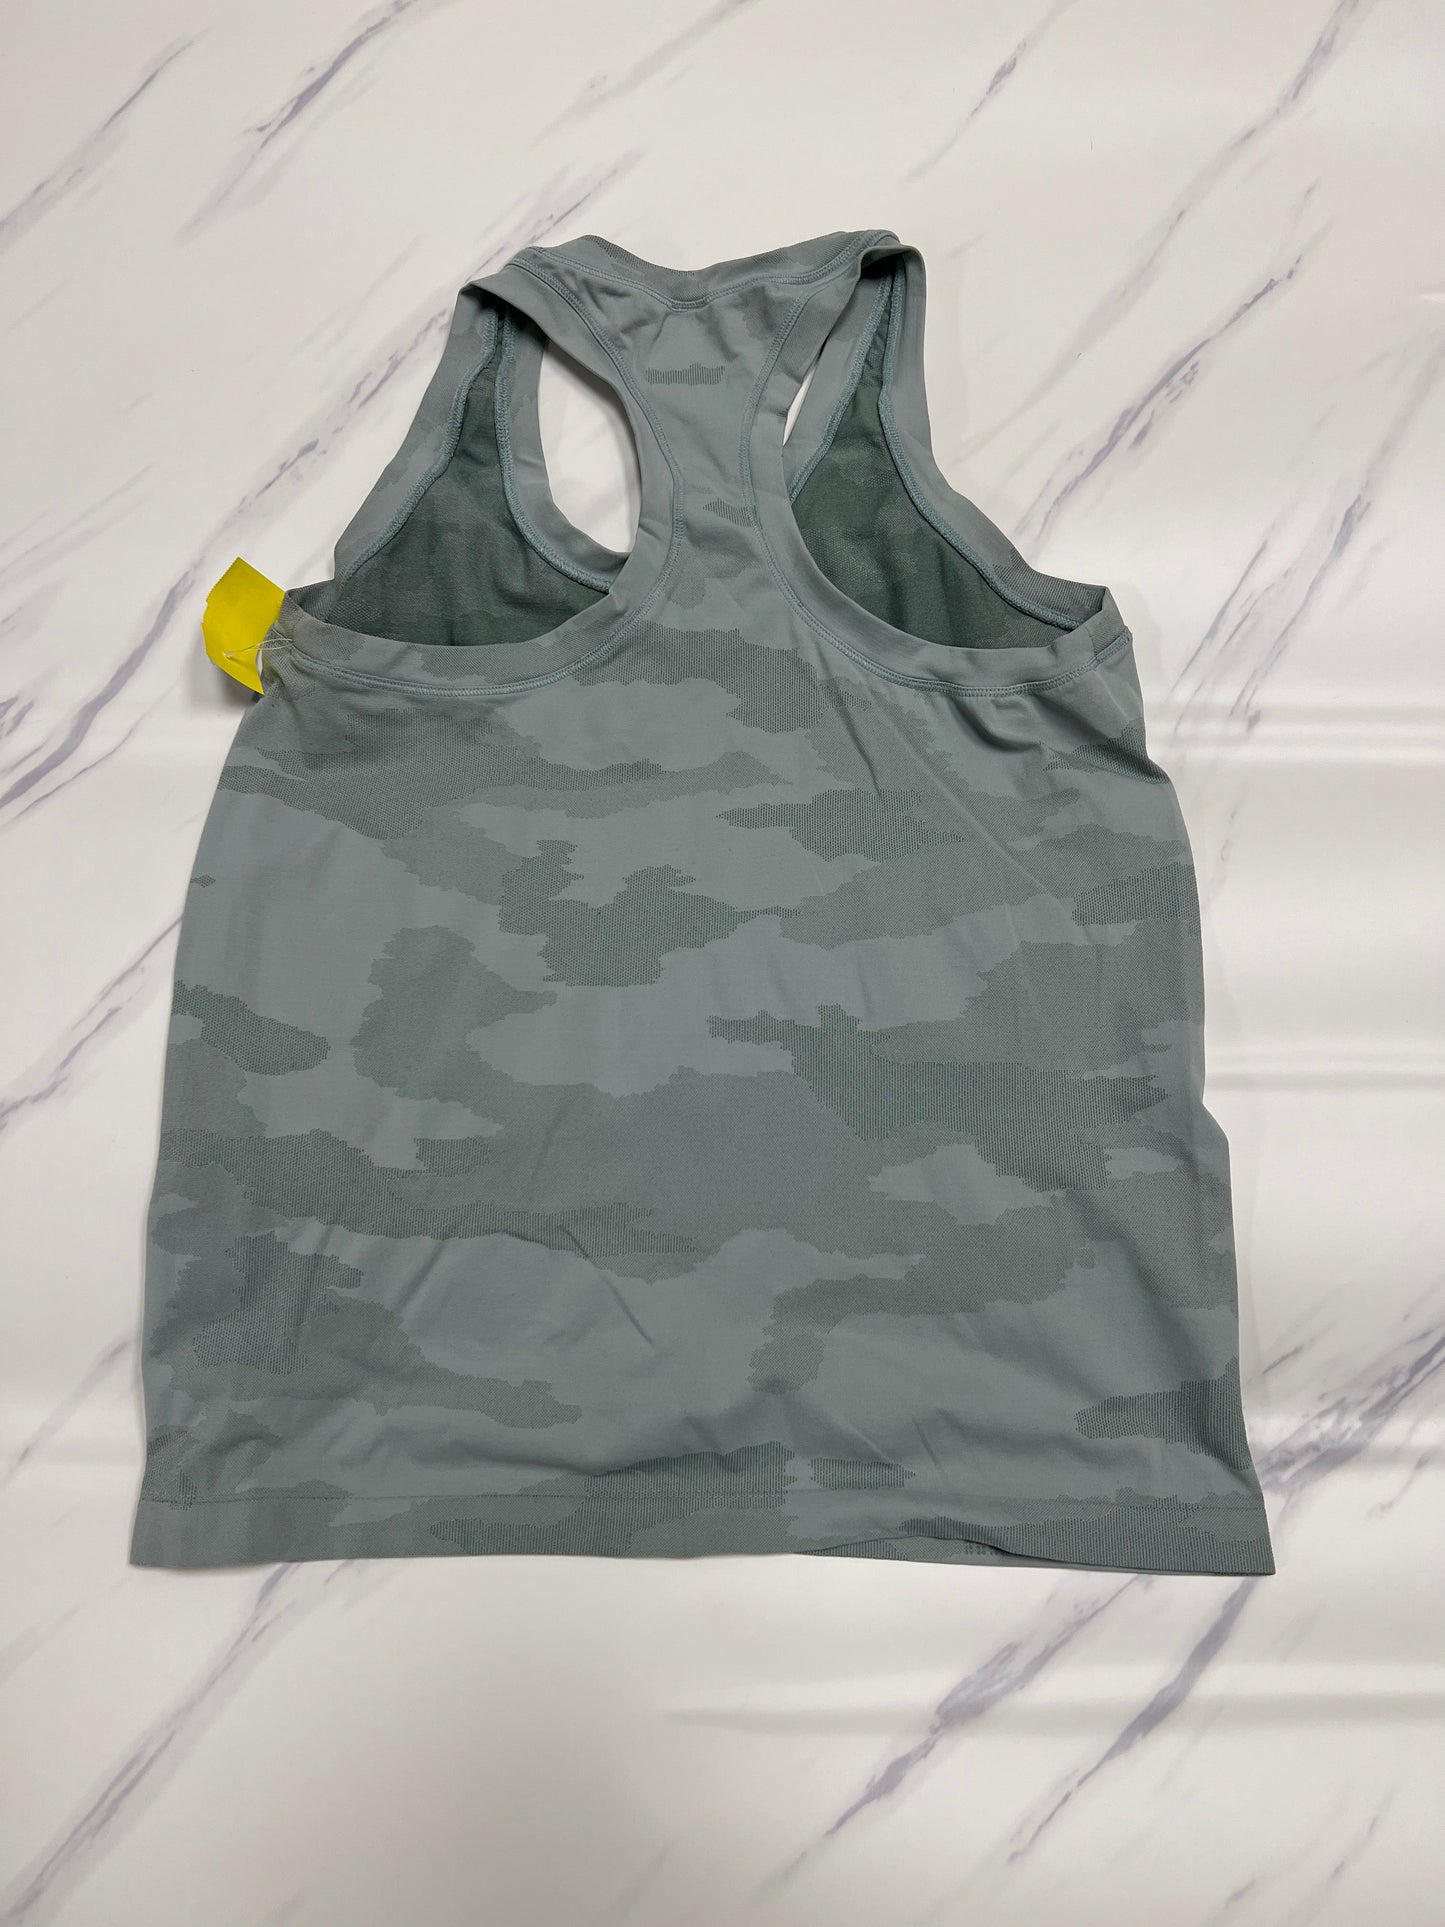 Athletic Tank Top By Athleta  Size: 6